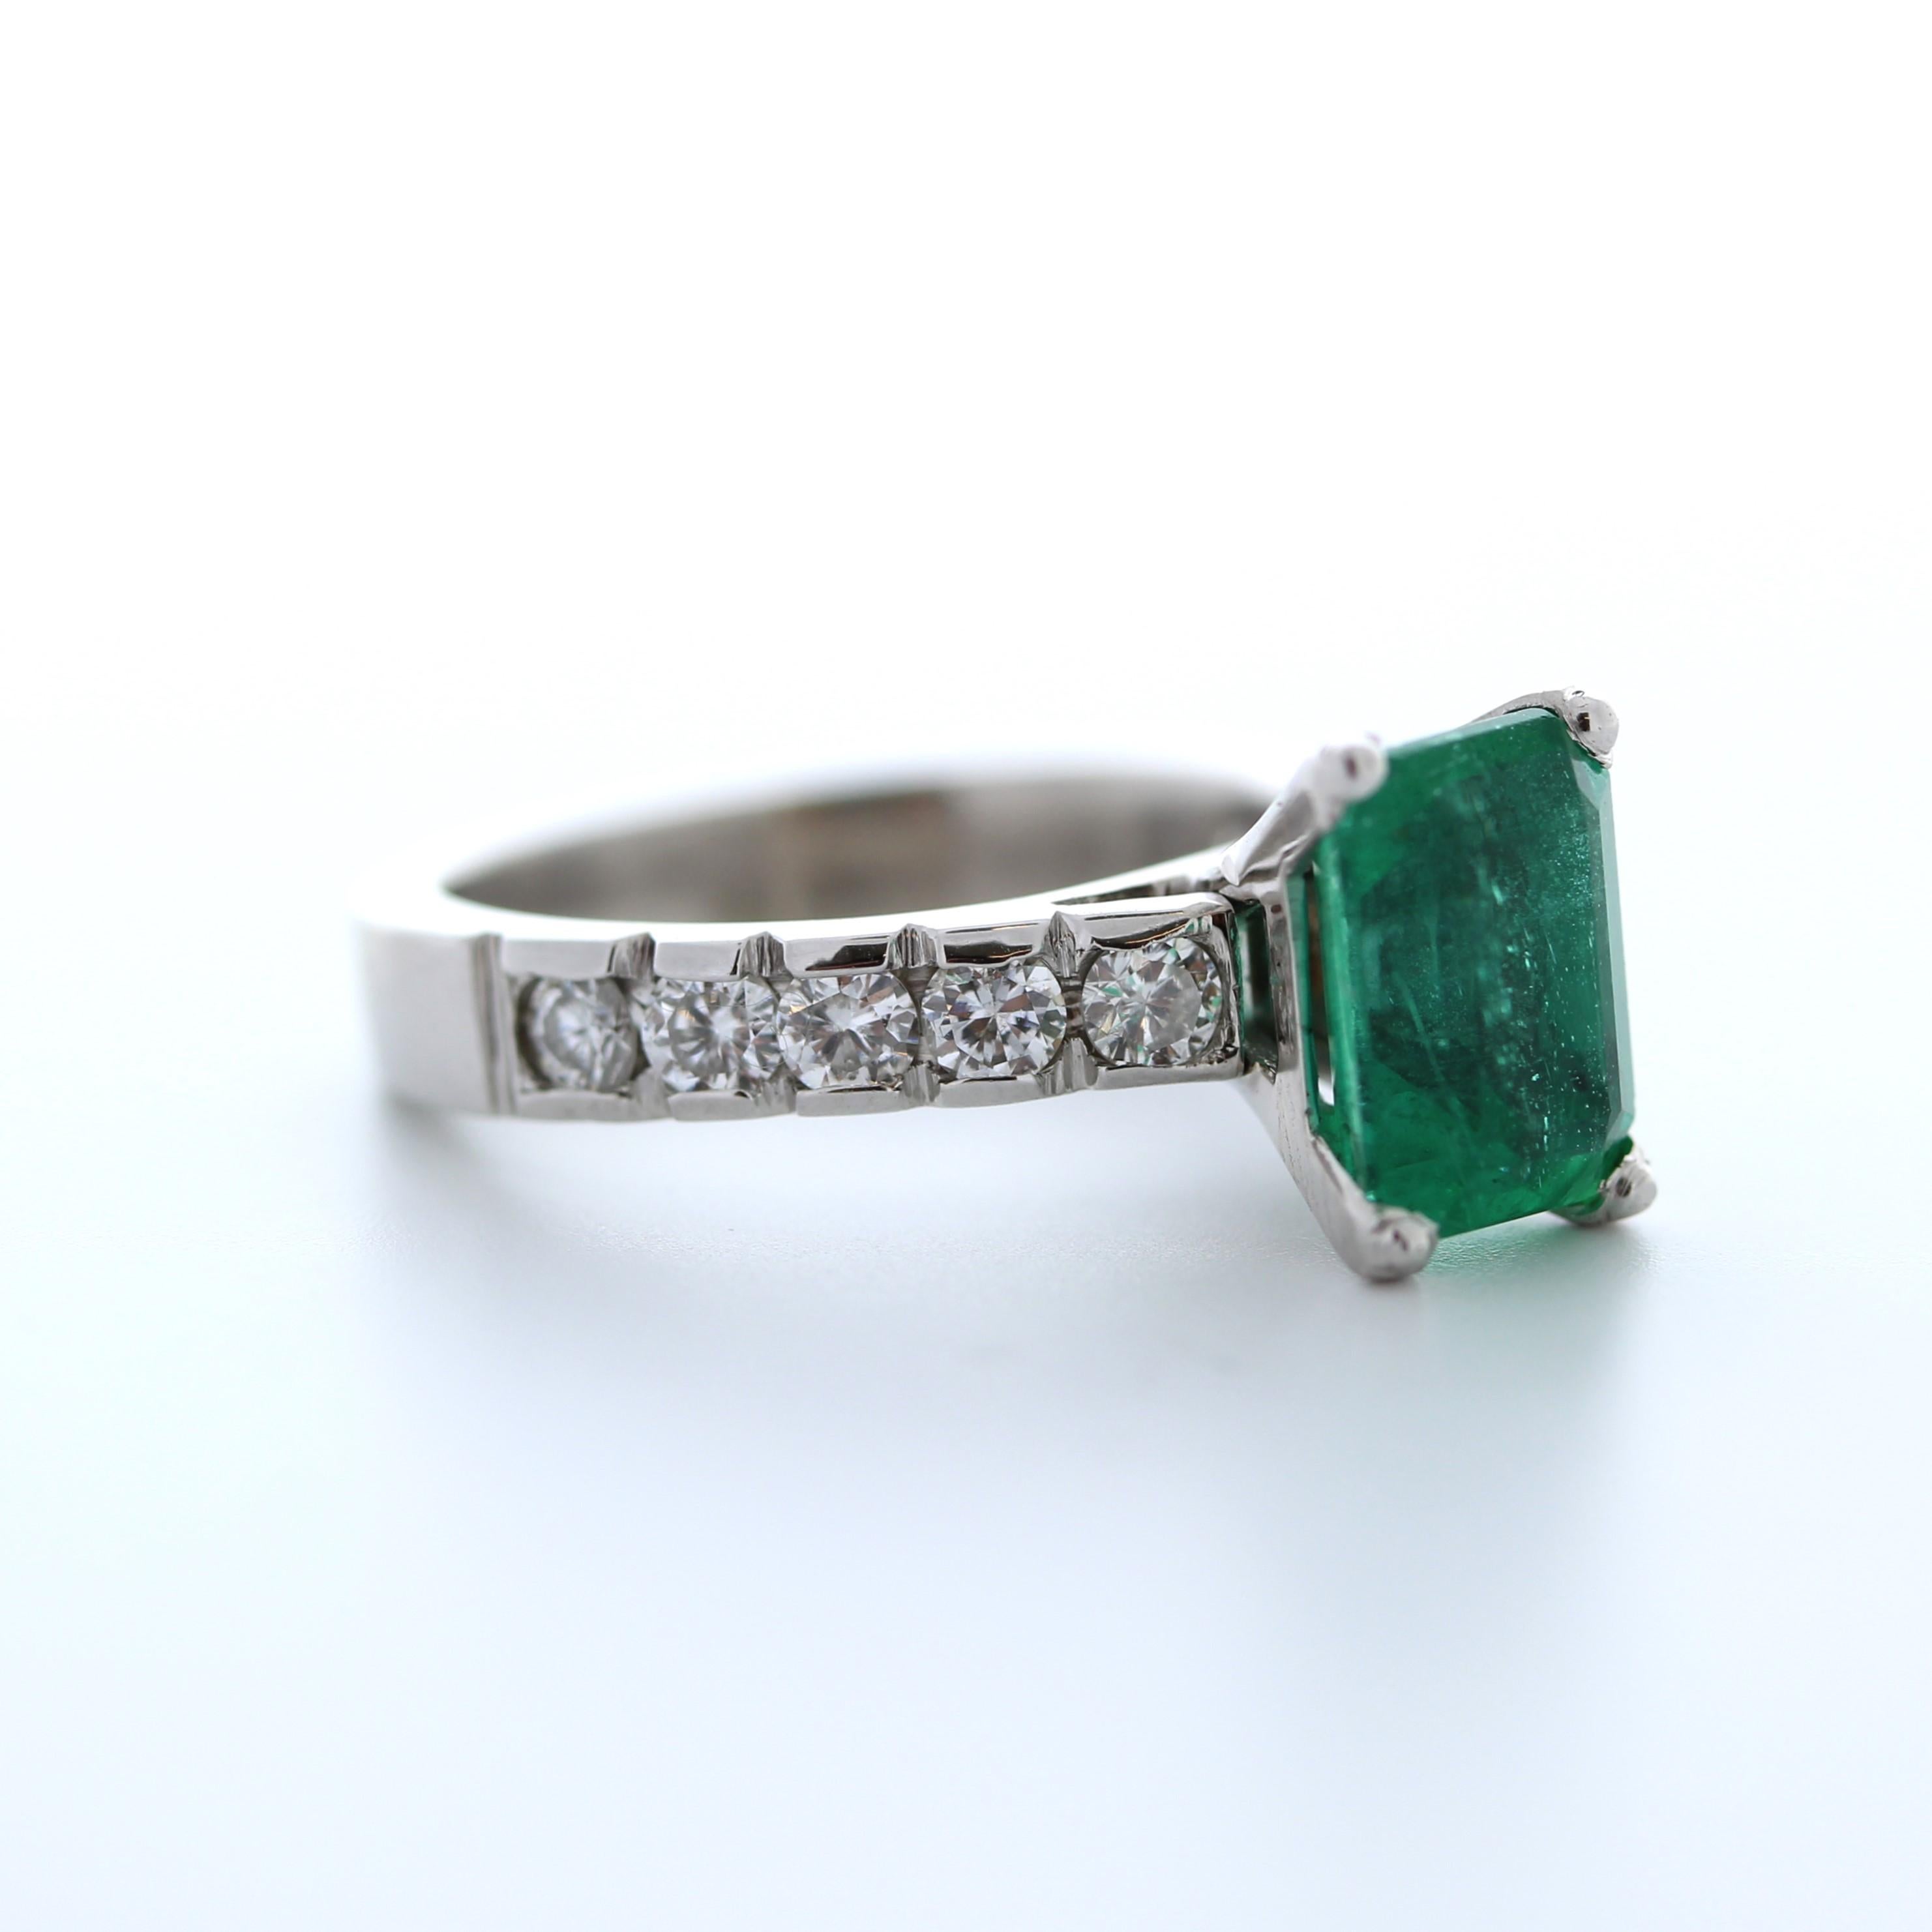 The 2.27 Green Emerald & Round Diamond Fashion Ring is a stunning piece of jewelry made from 14K white gold. The ring features a green emerald stone as its centerpiece, which is surrounded by ten round diamonds, totaling 0.90 carats. The diamonds